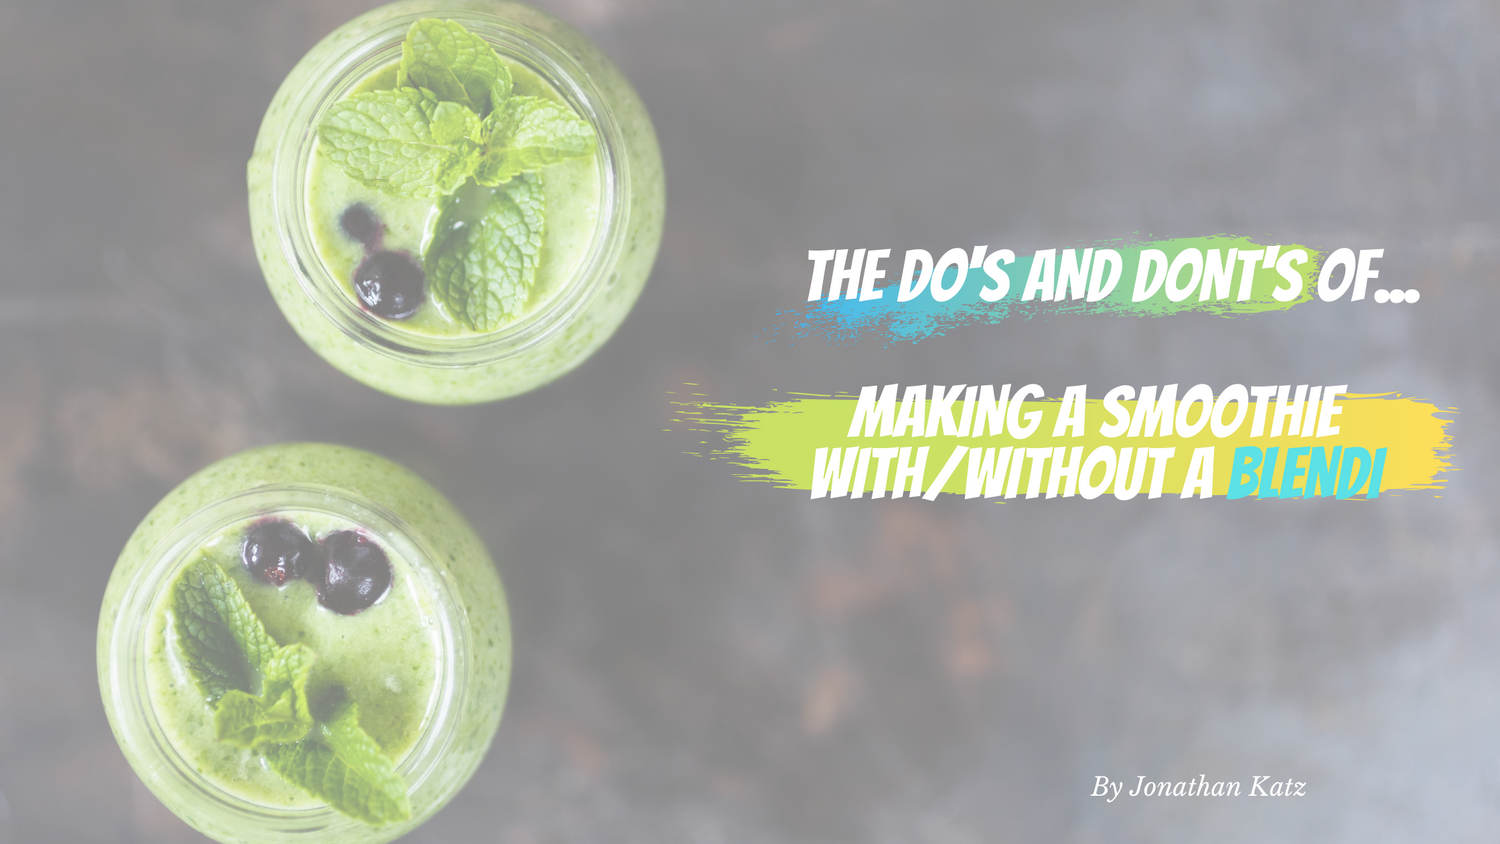 The Dos and Don’t of Making a Smoothie with/without a BLENDi